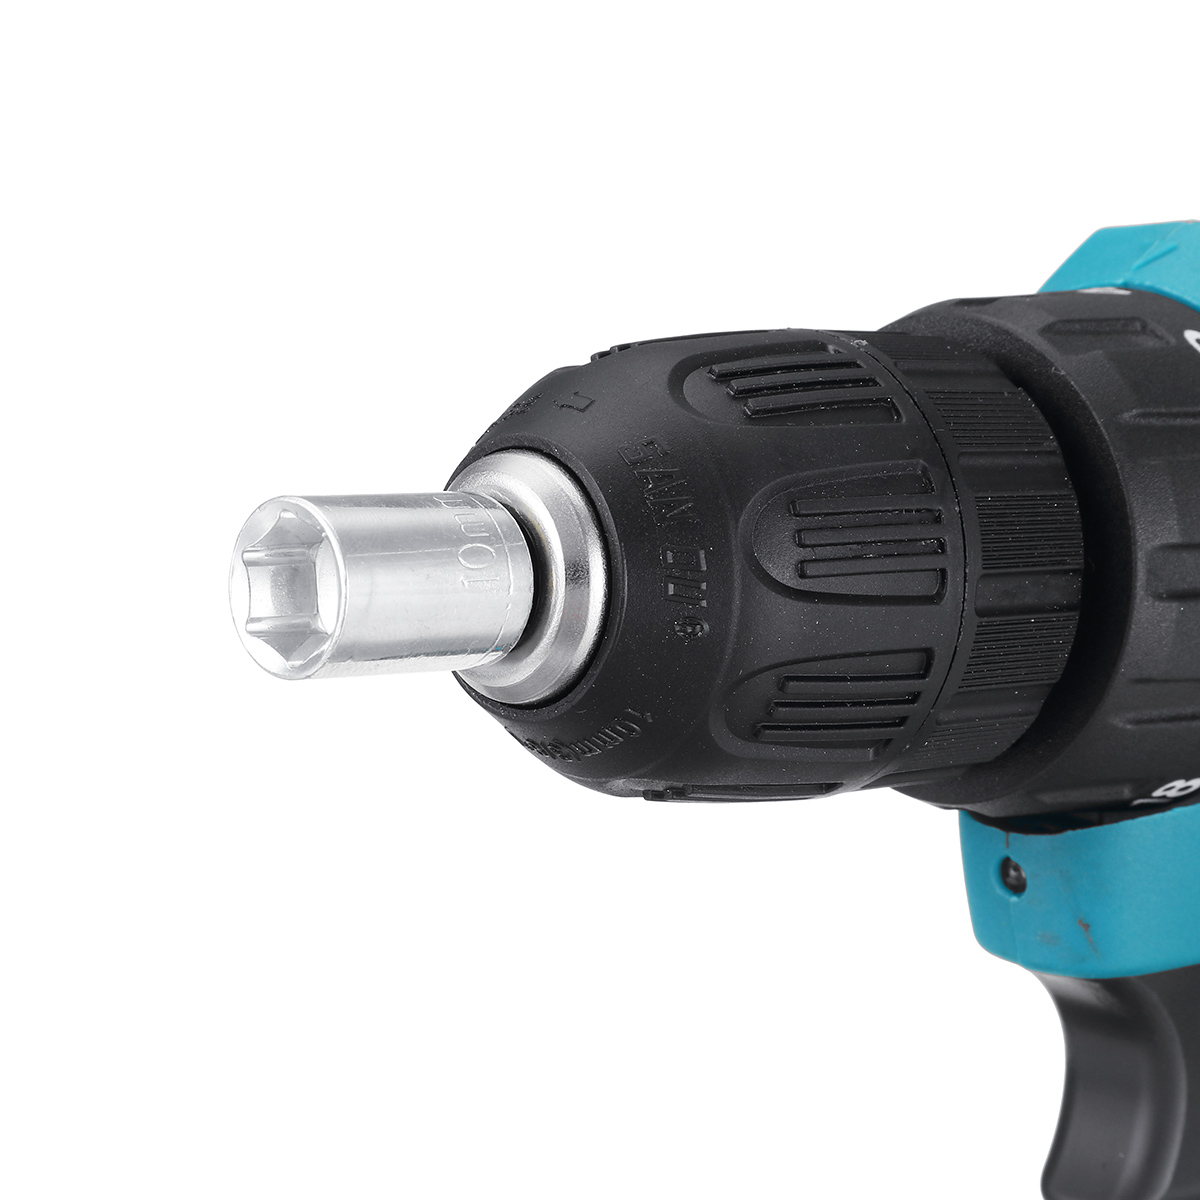 2000rpm-38Nm-21V-Lithium-Electric-Impact-Hammer-Drill-Wood-Drilling-Screwdrivers-with-Battery-1943477-27